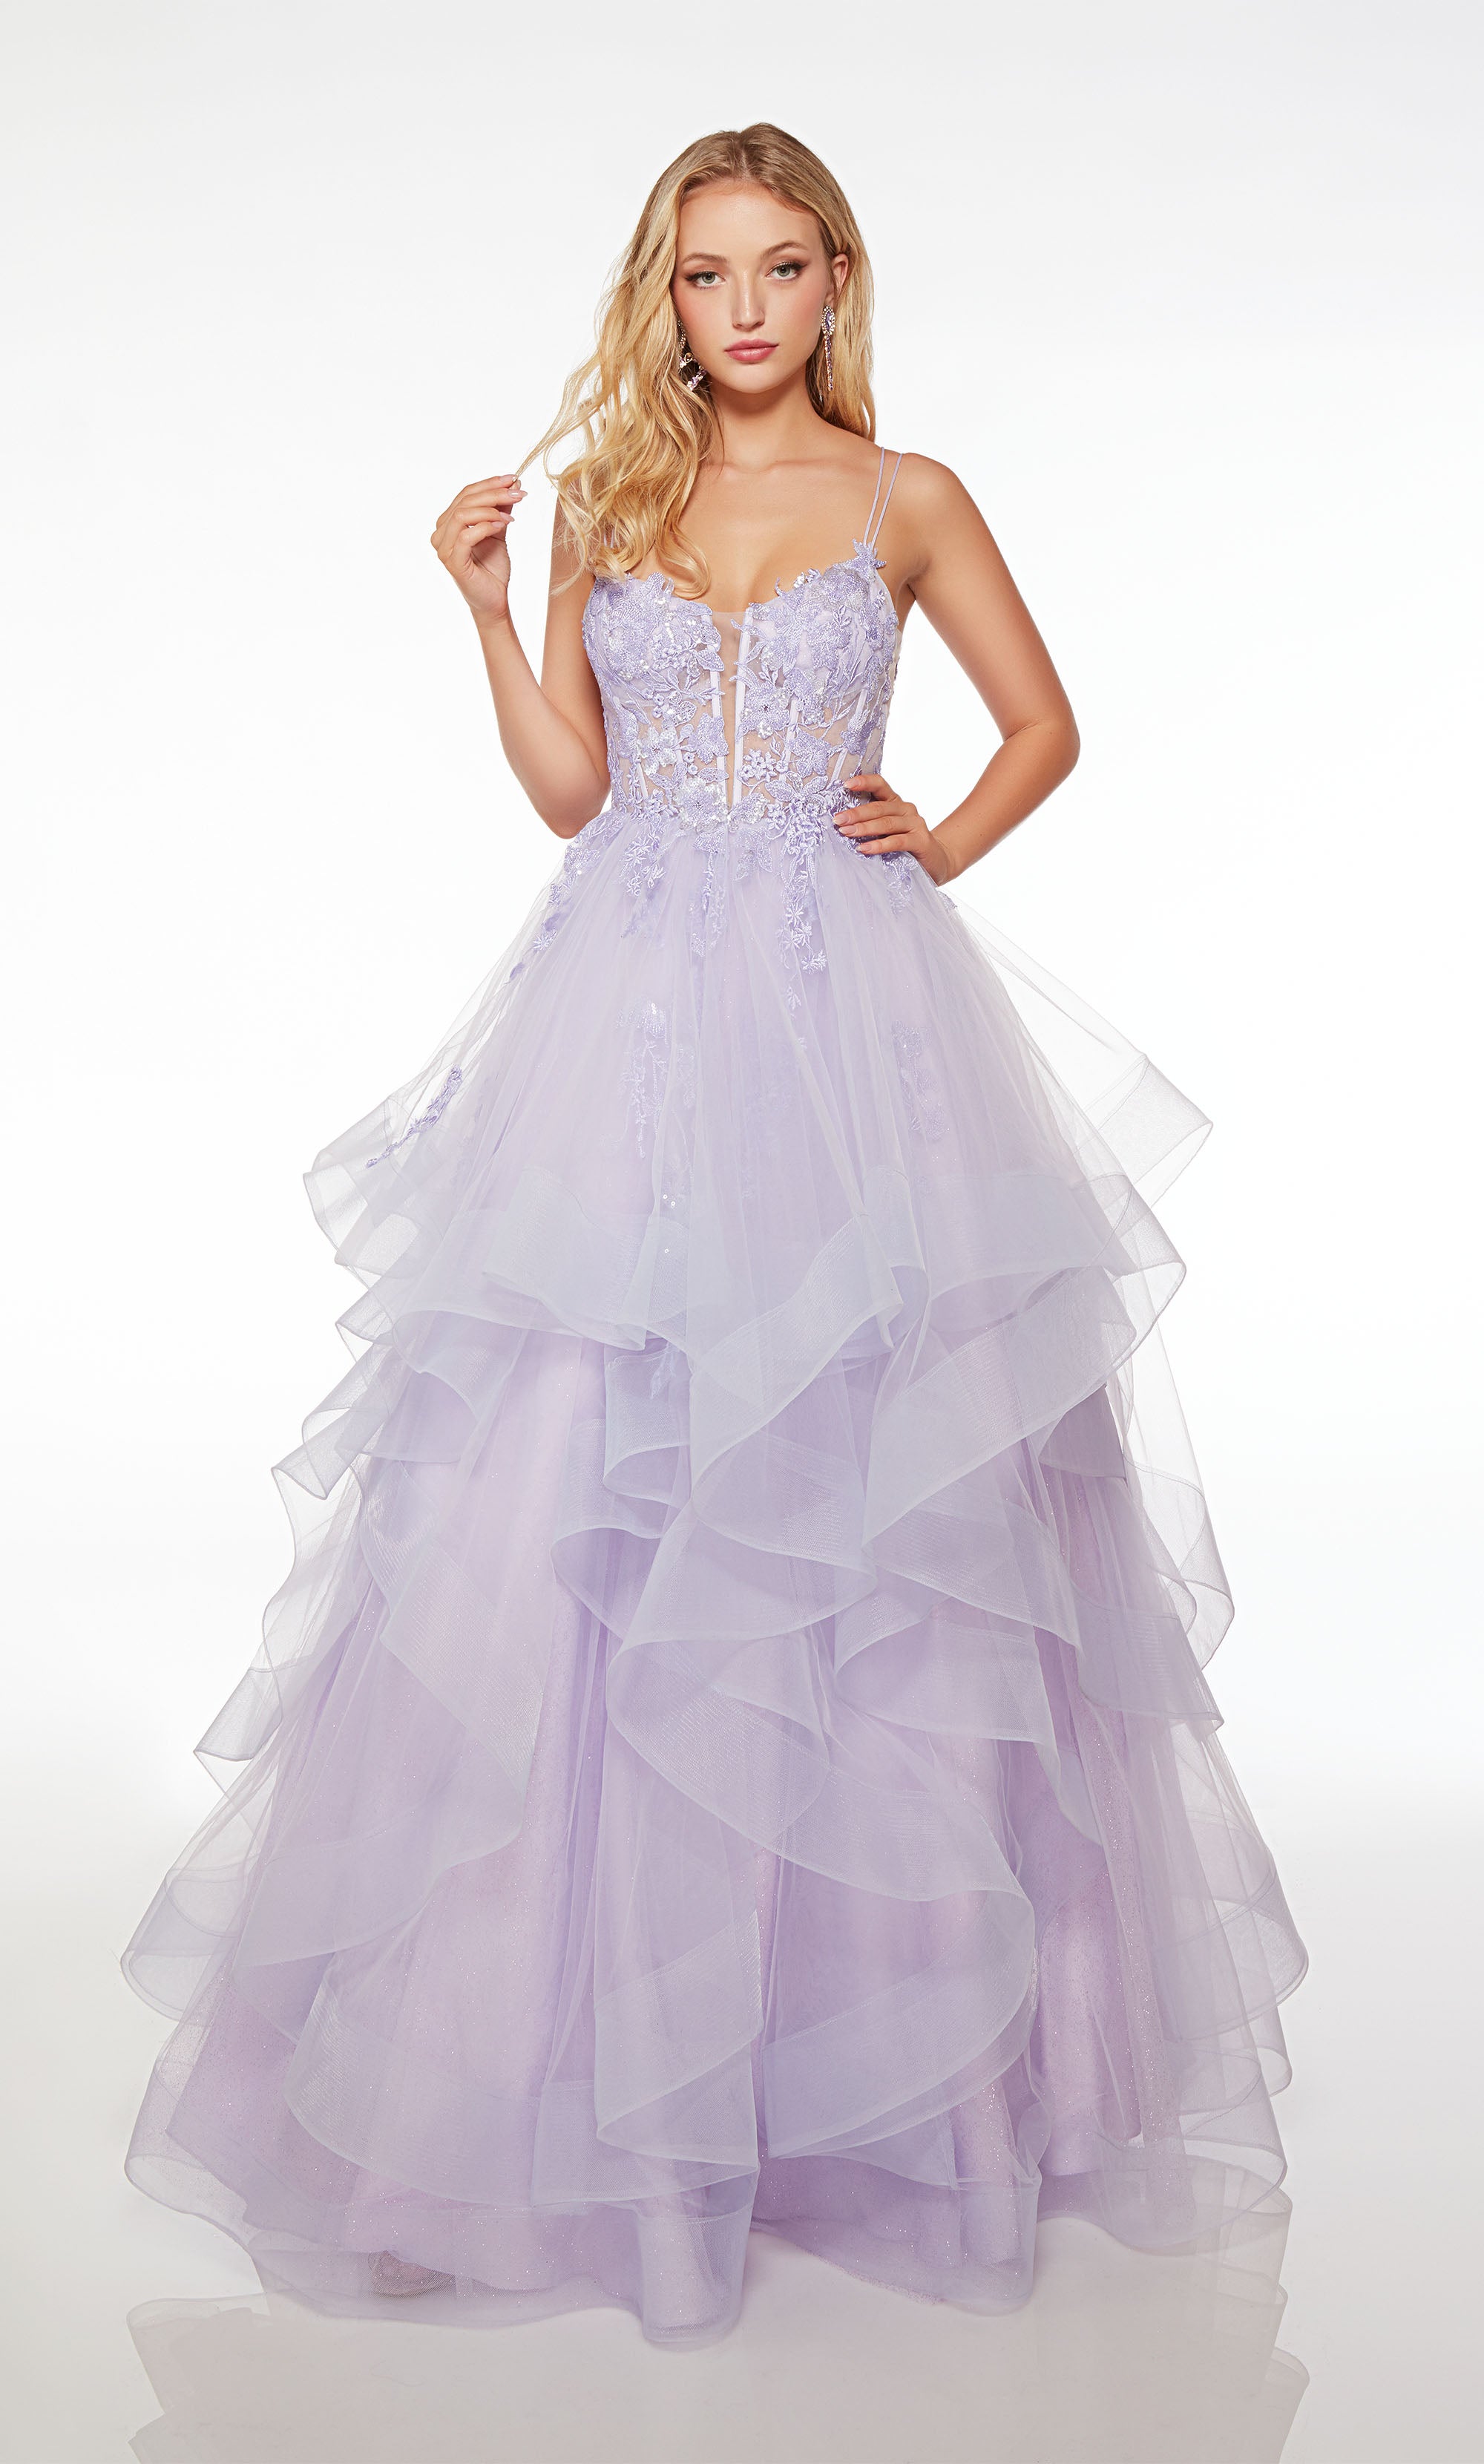 Charming light purple corset ball gown with sheer floral lace top, dual spaghetti straps, crisscross lace-up back, ruffled skirt, and delicate floral lace appliques.